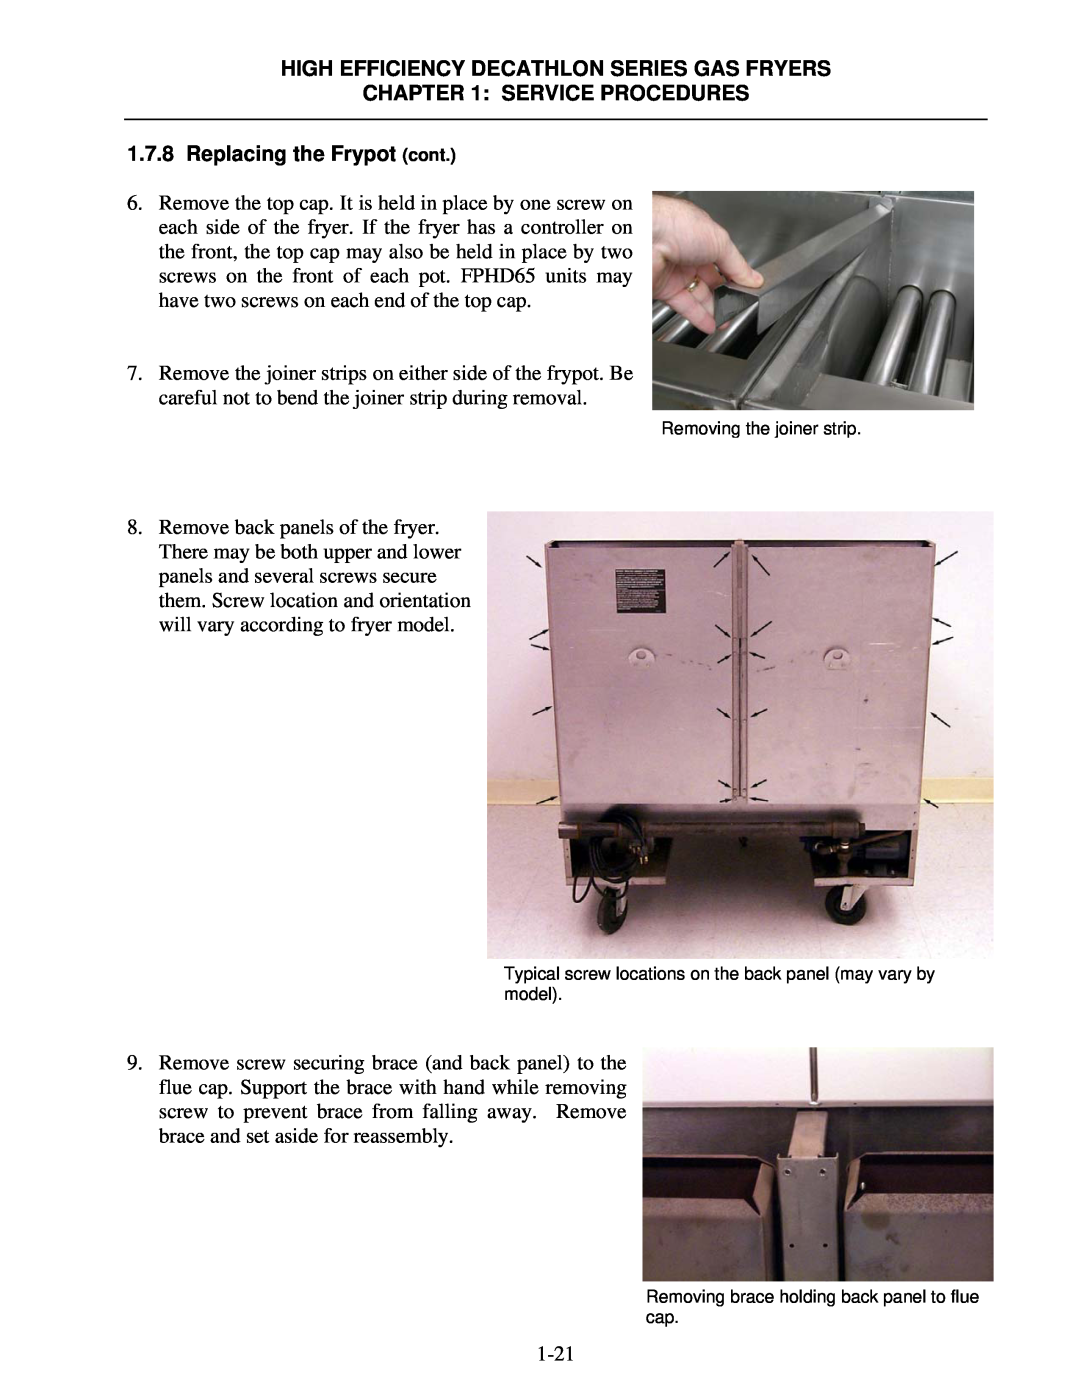 Frymaster FPHD manual Replacing the Frypot cont, High Efficiency Decathlon Series Gas Fryers, Service Procedures 